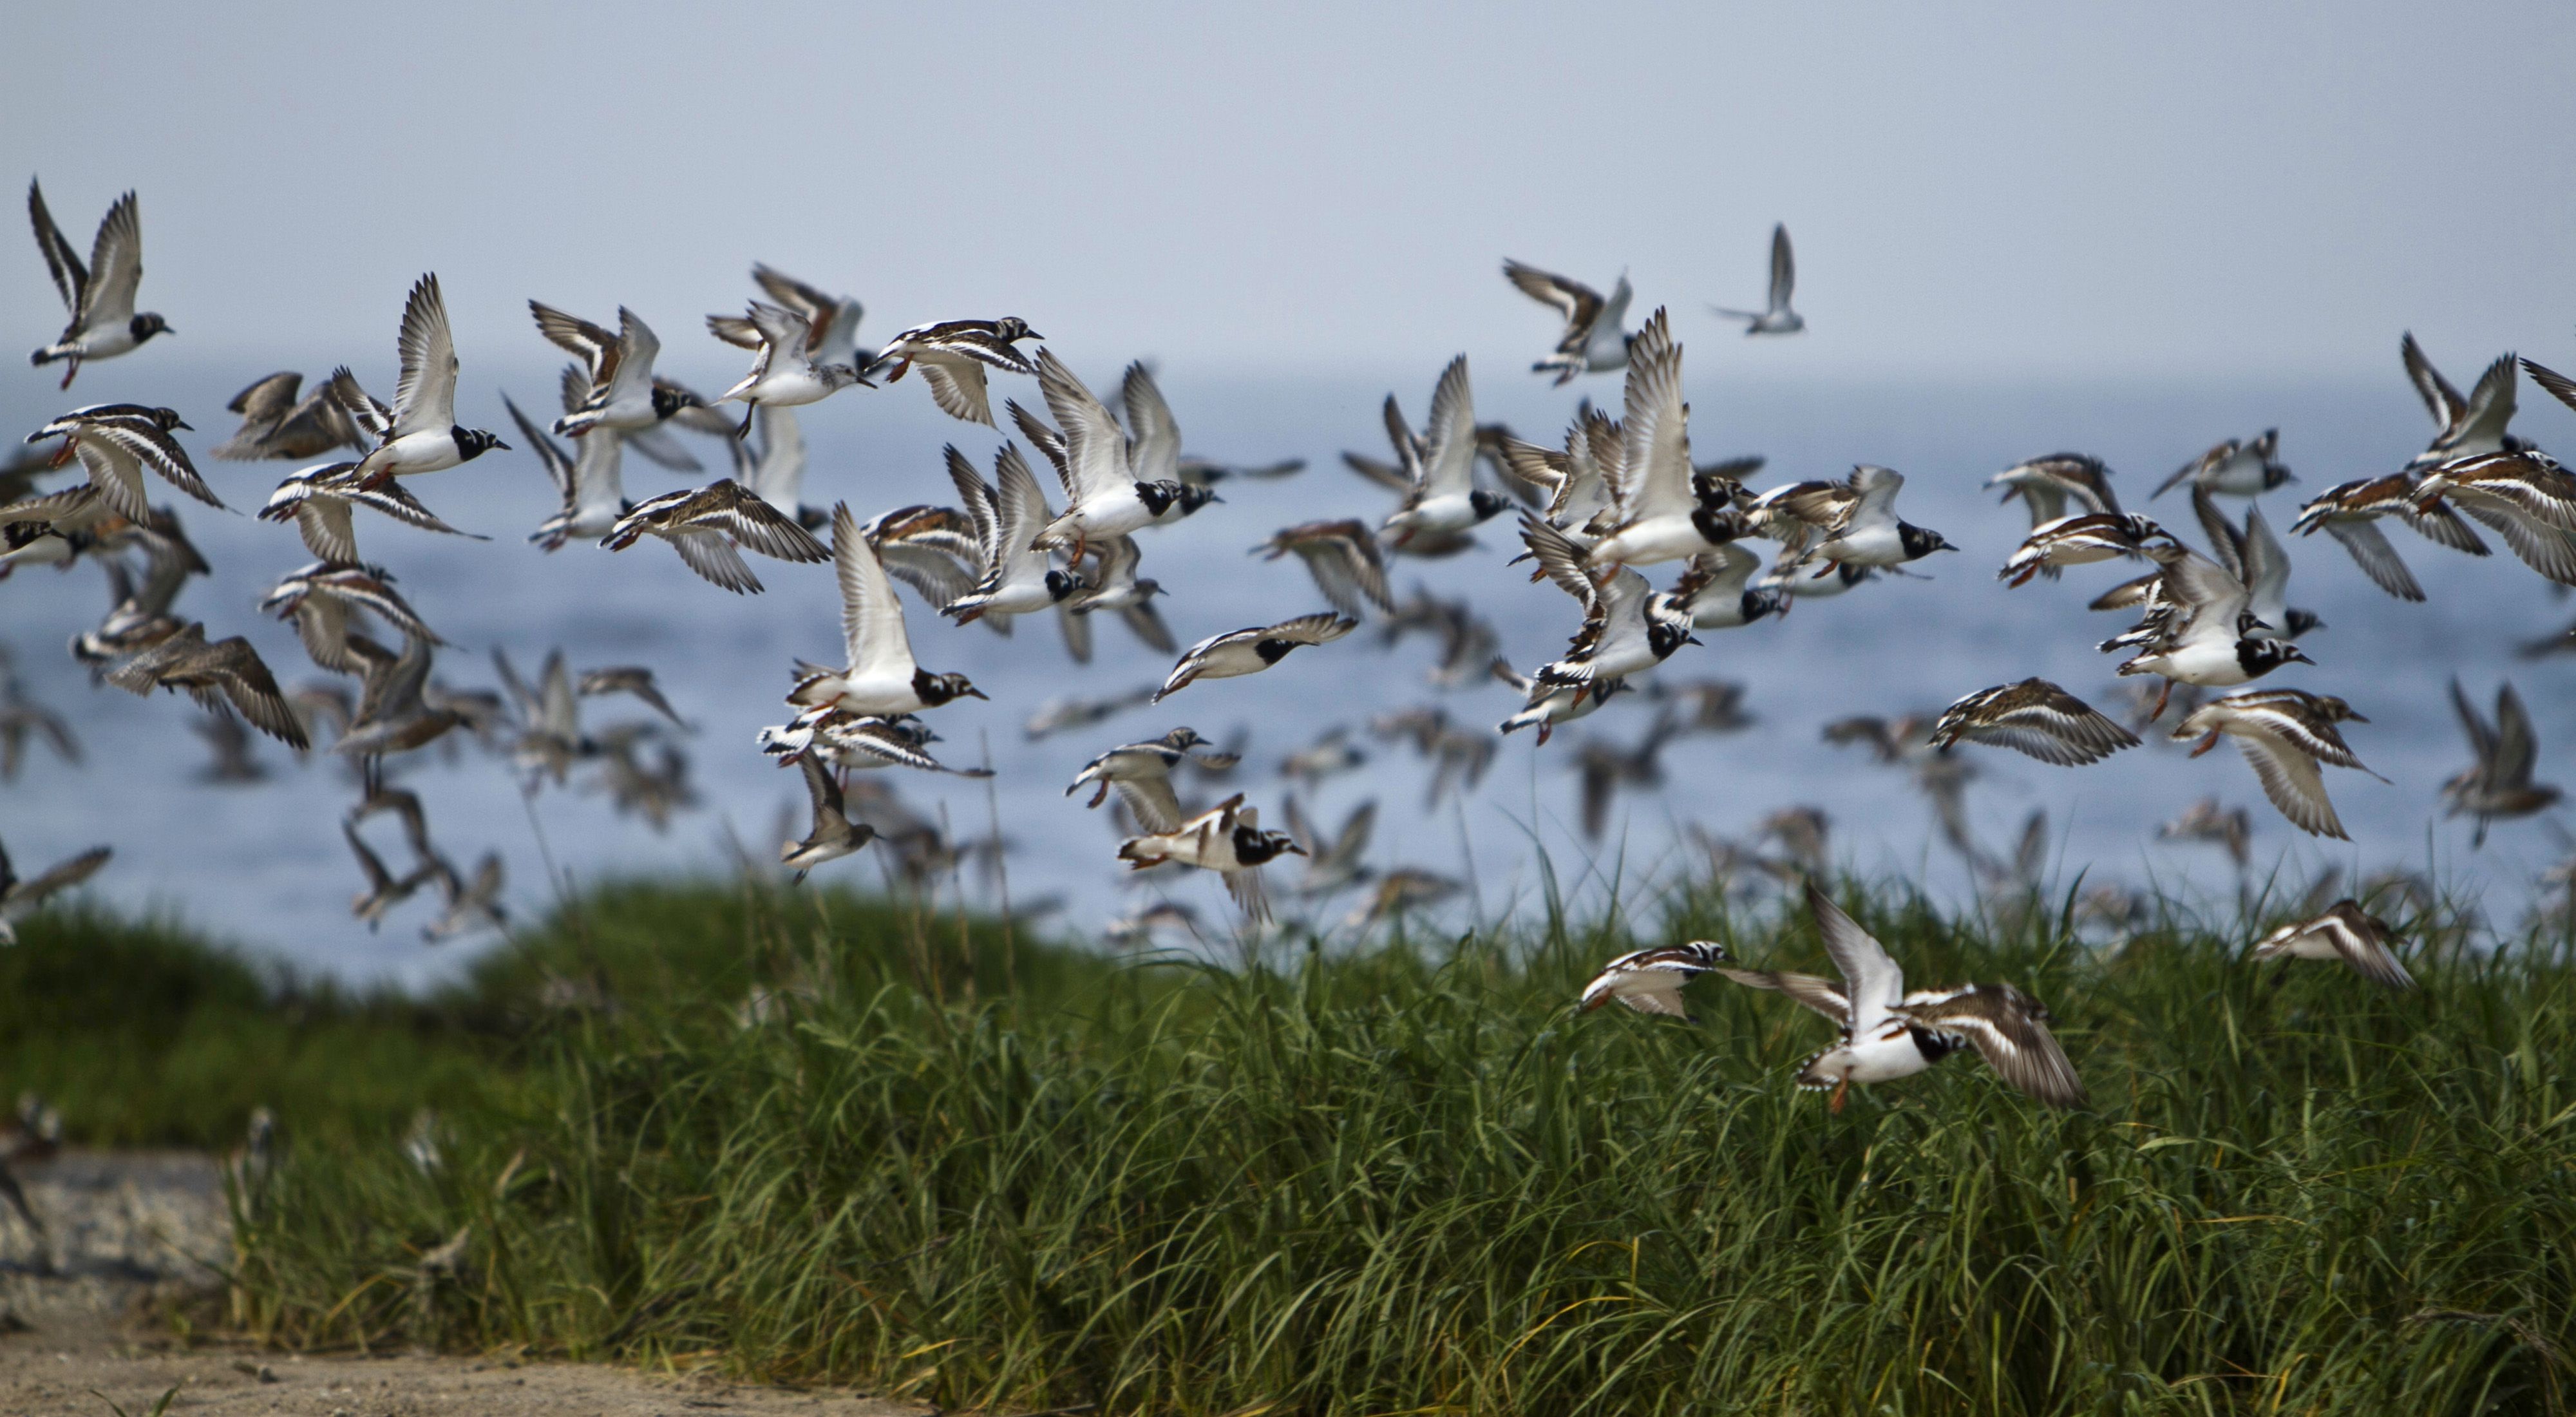 Shorebirds rely on the beaches and marshes of Gandy's Beach.